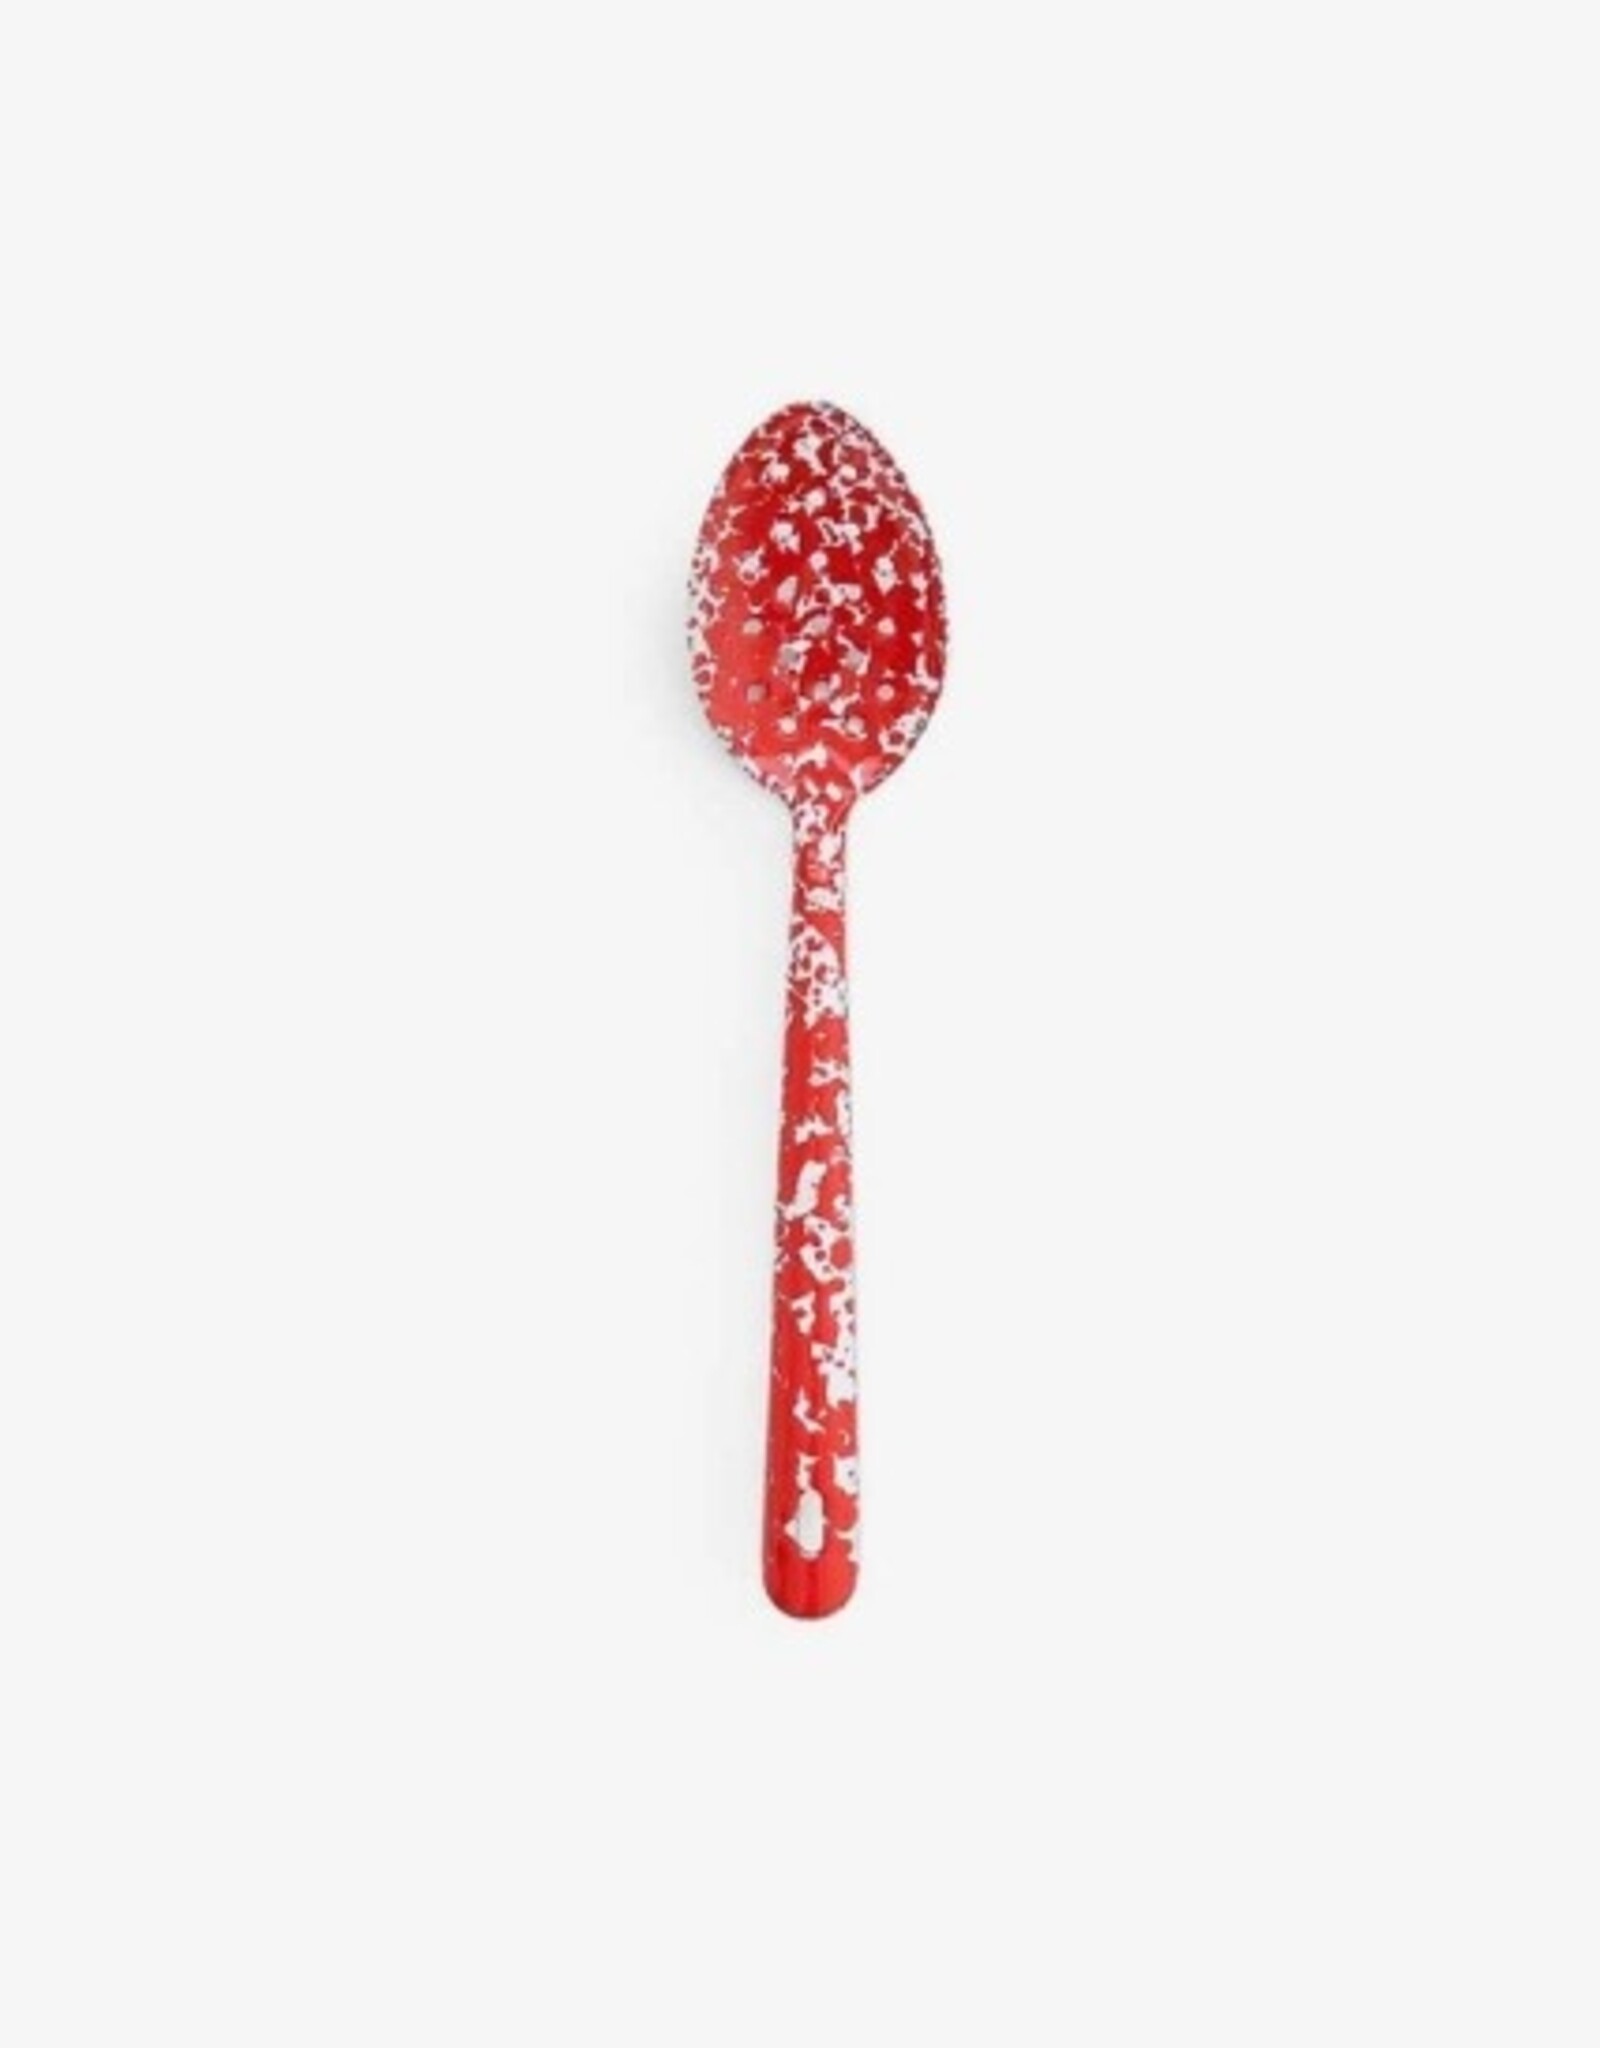 Crow Canyon Slotted Spoon: Red Splatter